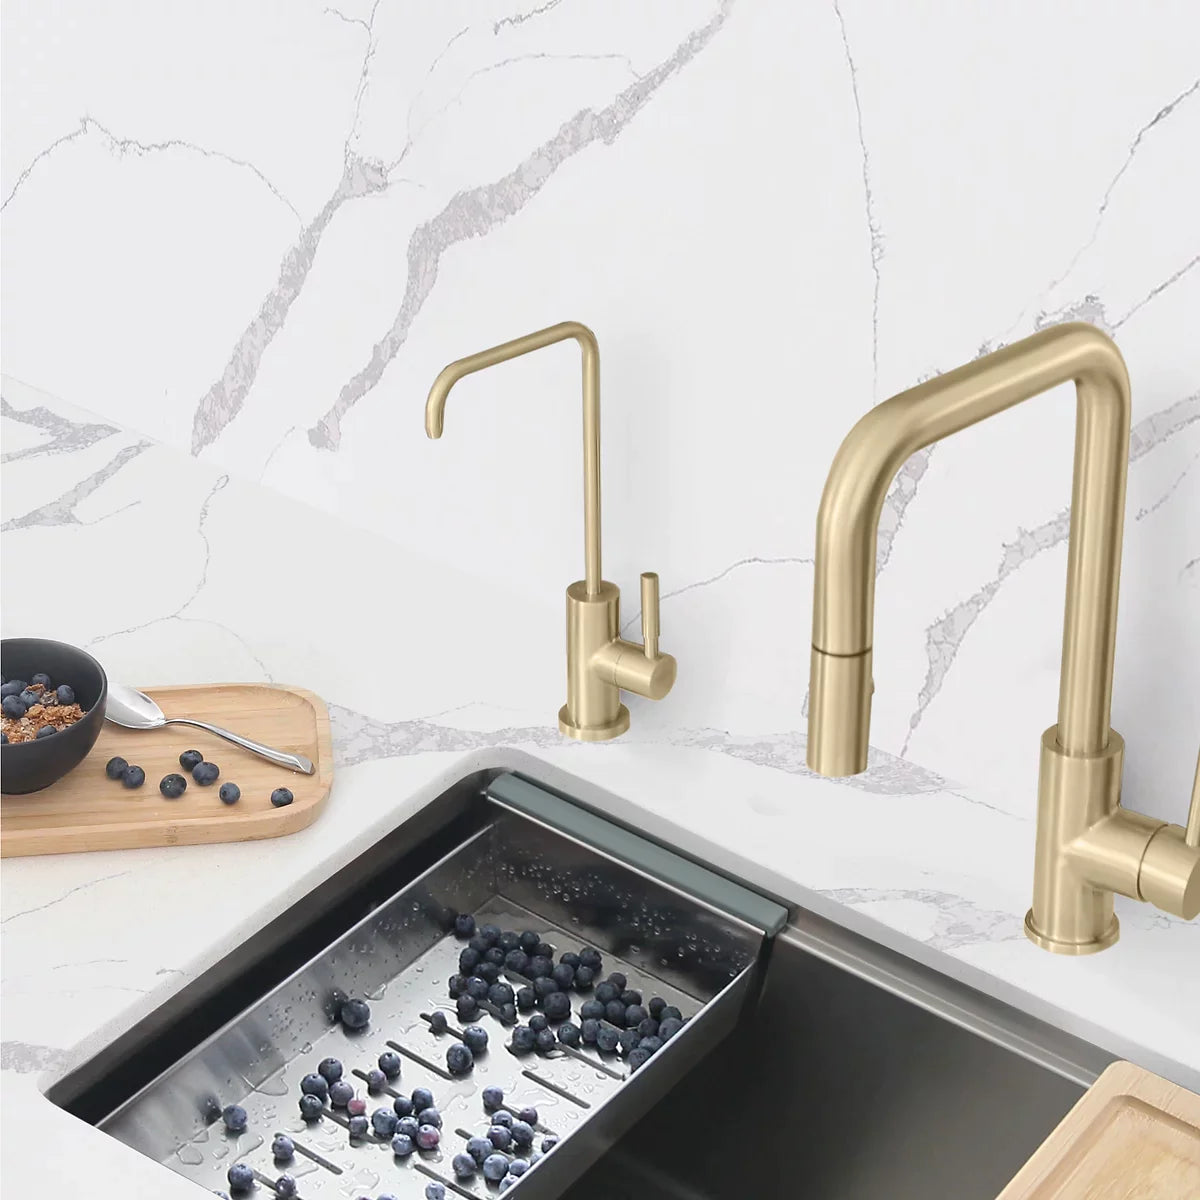 Stylish Melfi Single Handle Cold Water Tap Stainless Steel Brushed Gold Finish K-147G